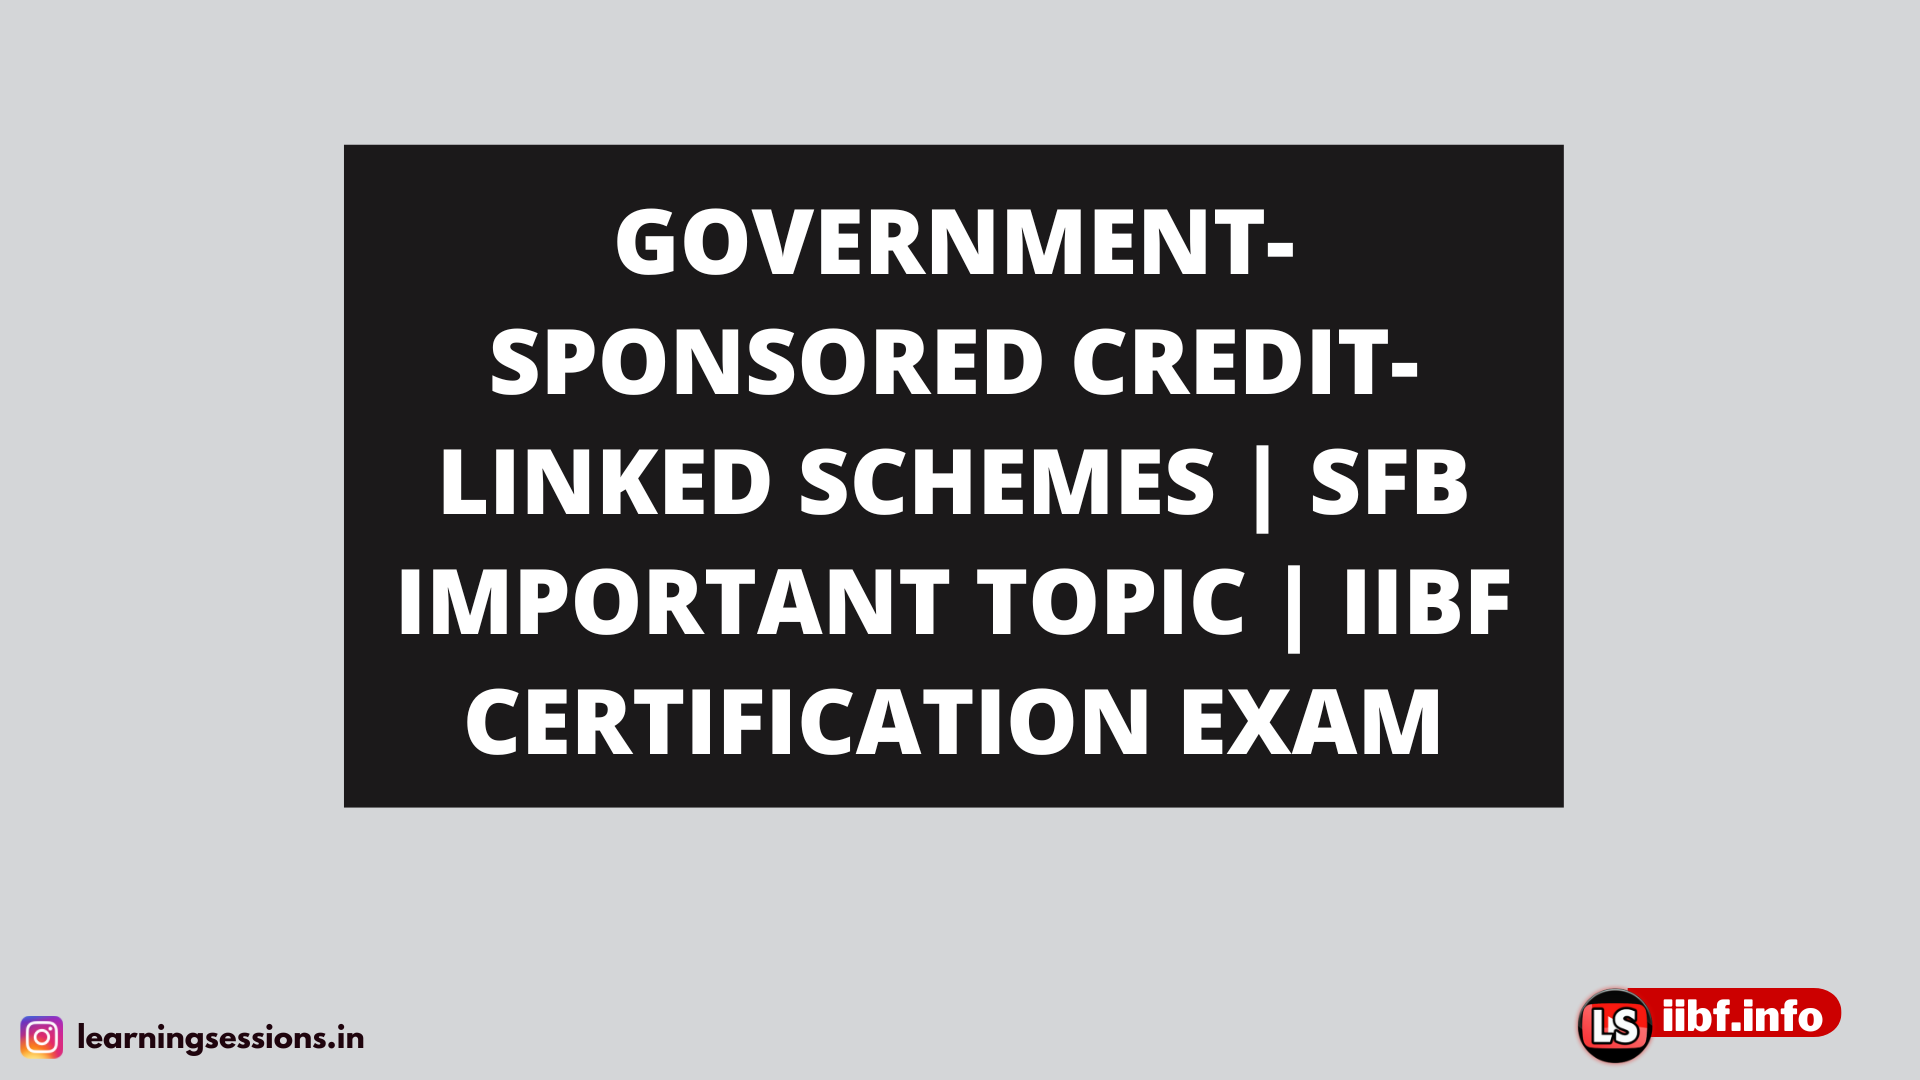 GOVERNMENT-SPONSORED CREDIT-LINKED SCHEMES | SFB IMPORTANT TOPIC | IIBF CERTIFICATION EXAM